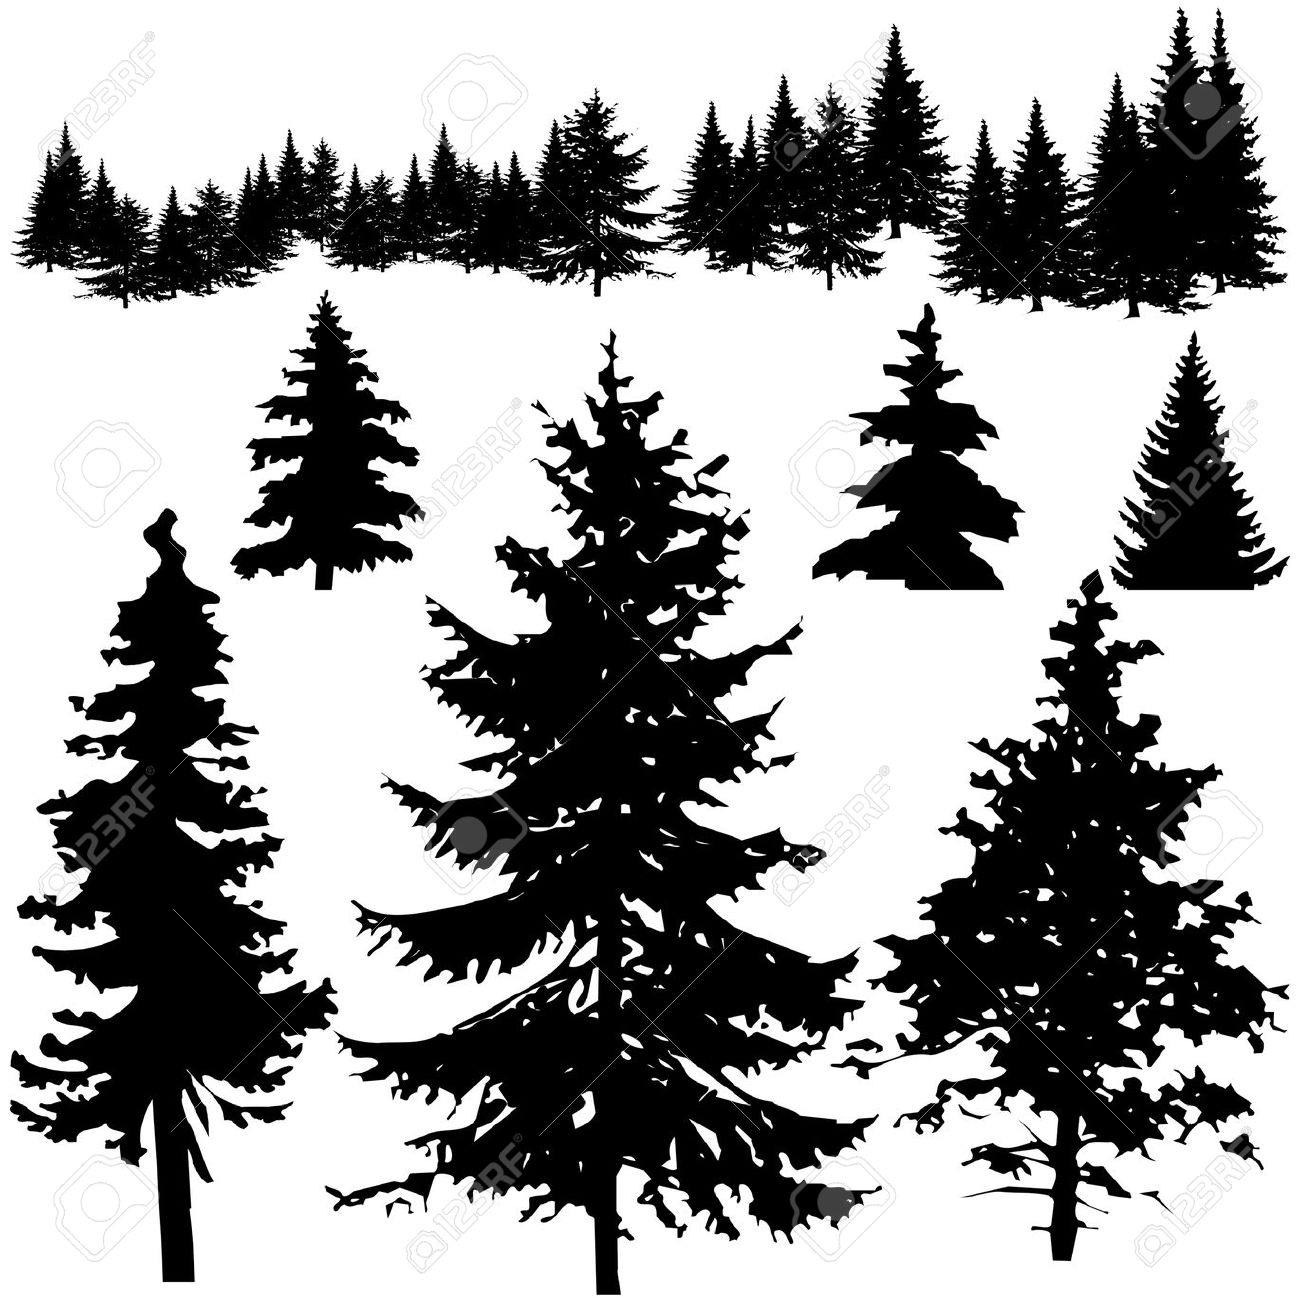 Pine tree silhouette clipart 2